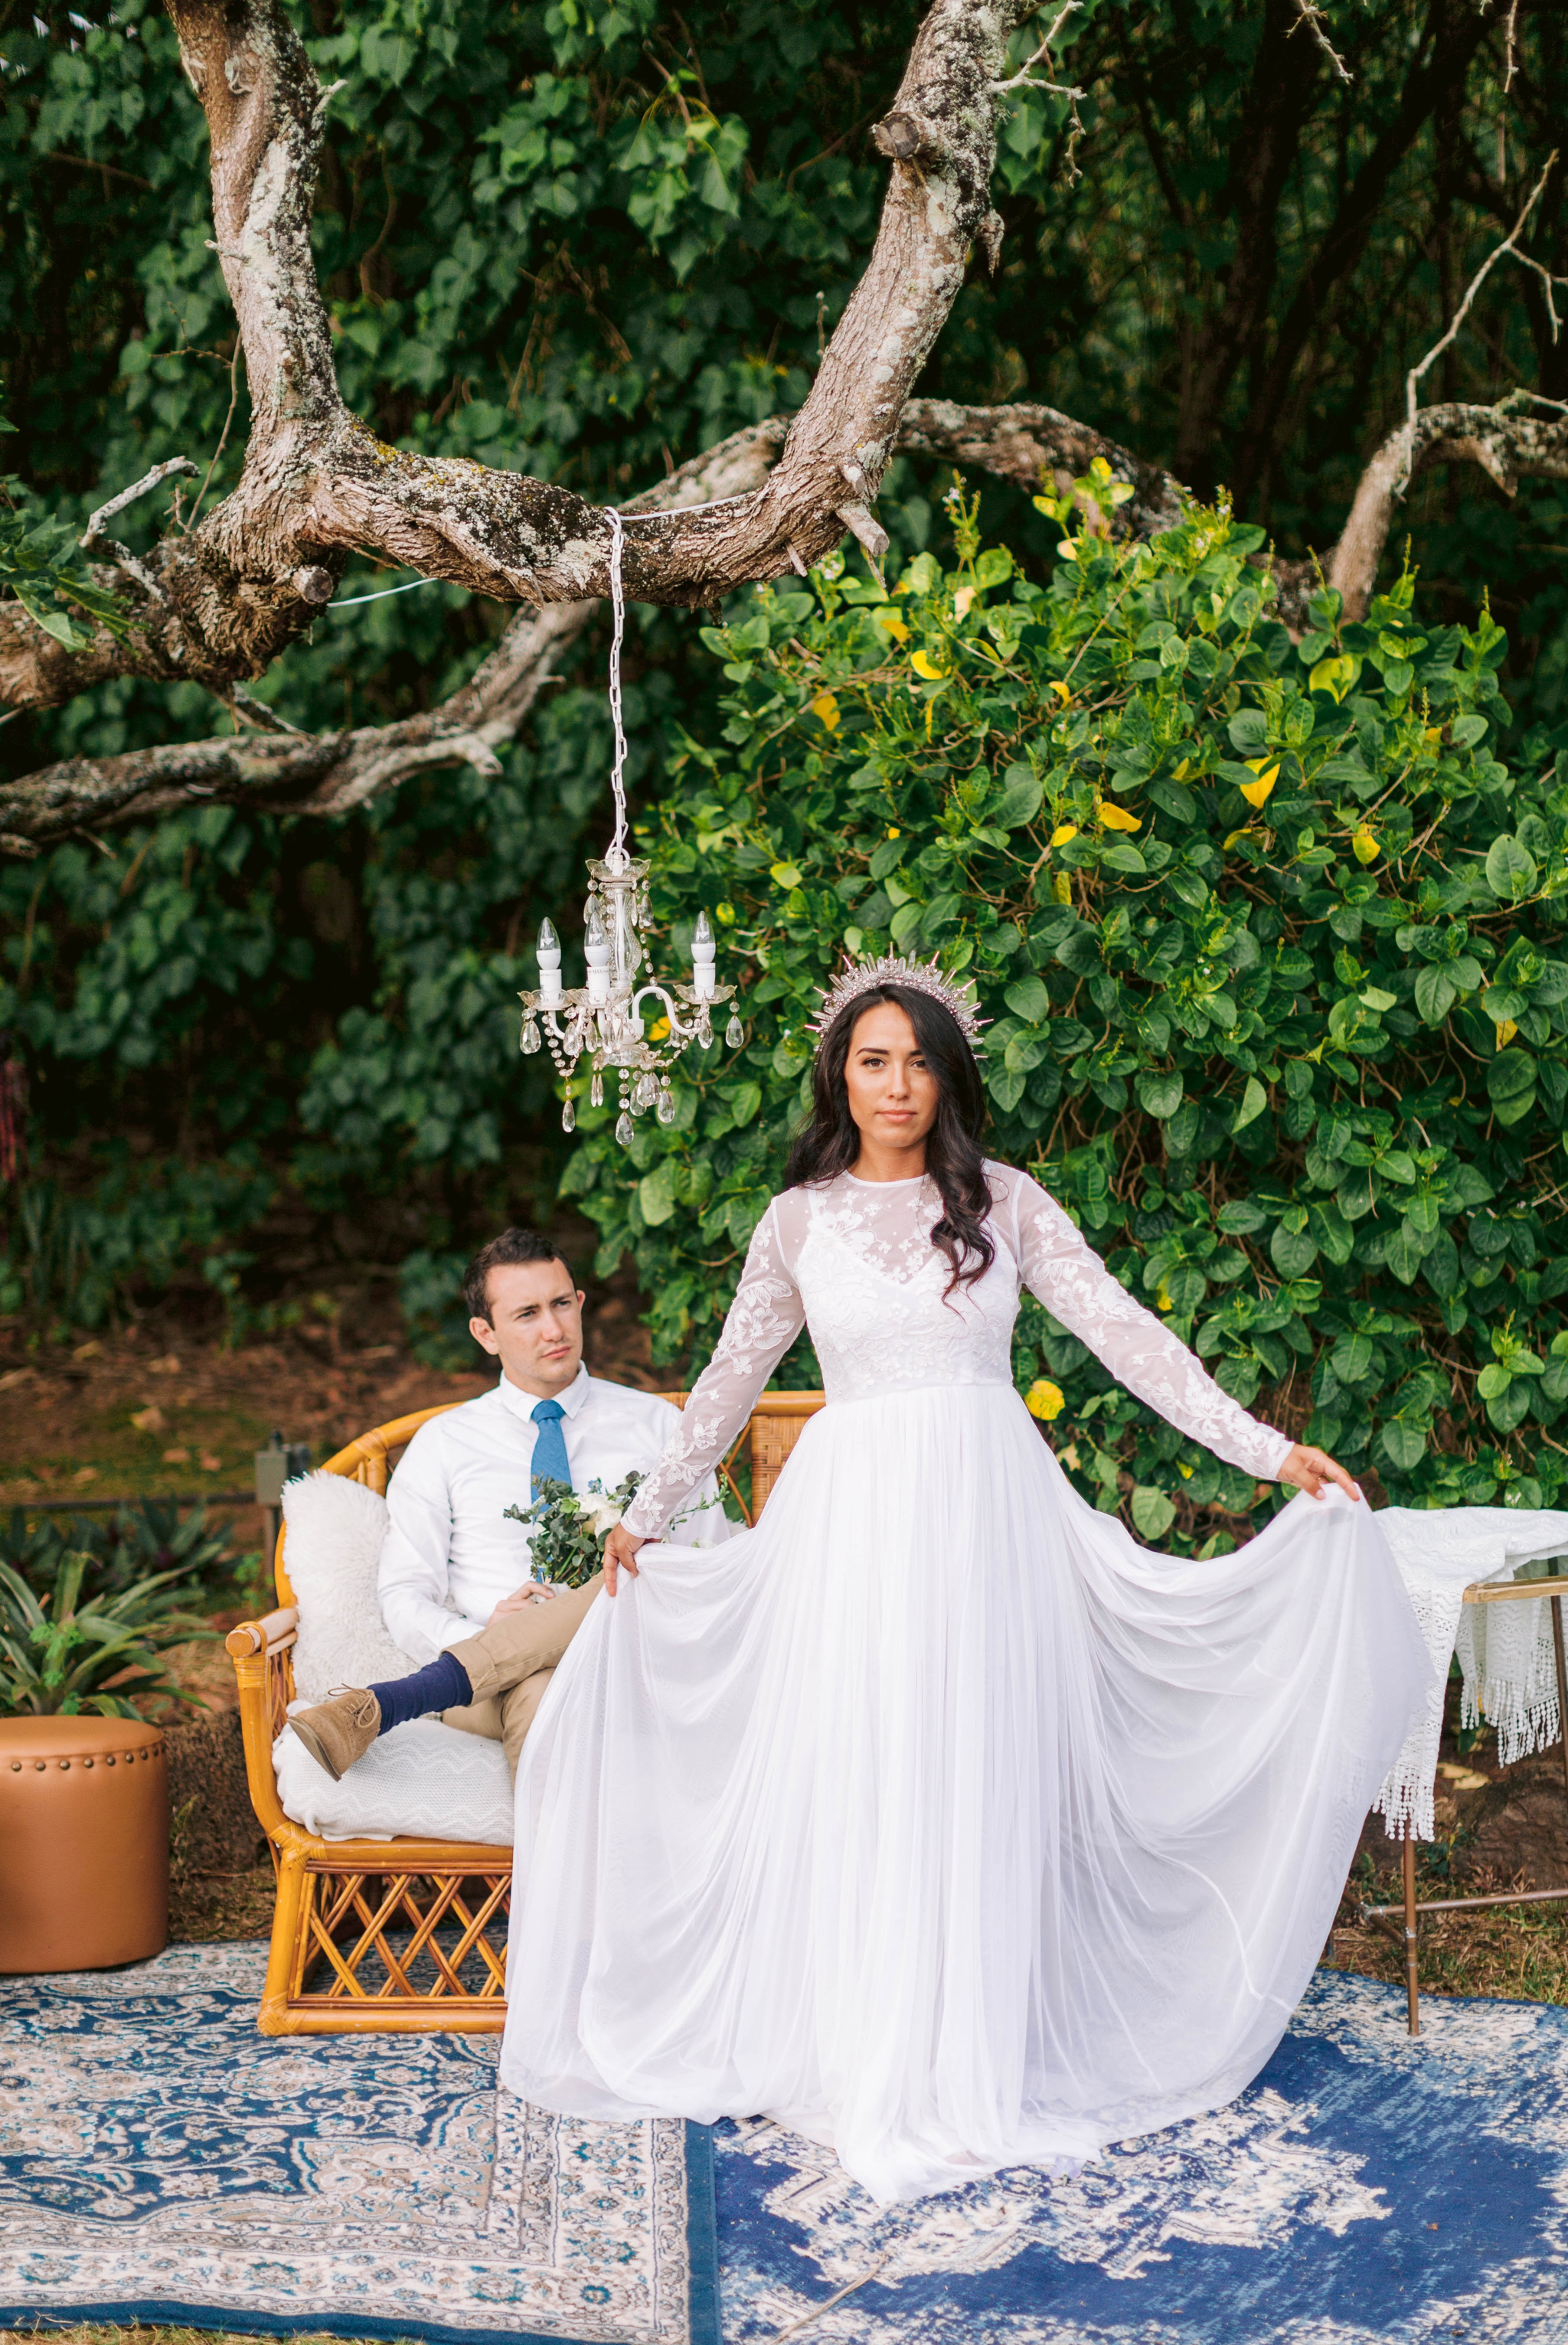  Bride and groom relaxing in an outdoor lounge with rattan furniture and blue rugs -  bride is wearing a wedding dress by asos and a crystal crown - Ana + Elijah - Wedding at Loulu Palm in Haleiwa, HI - Oahu Hawaii Wedding Photographer 